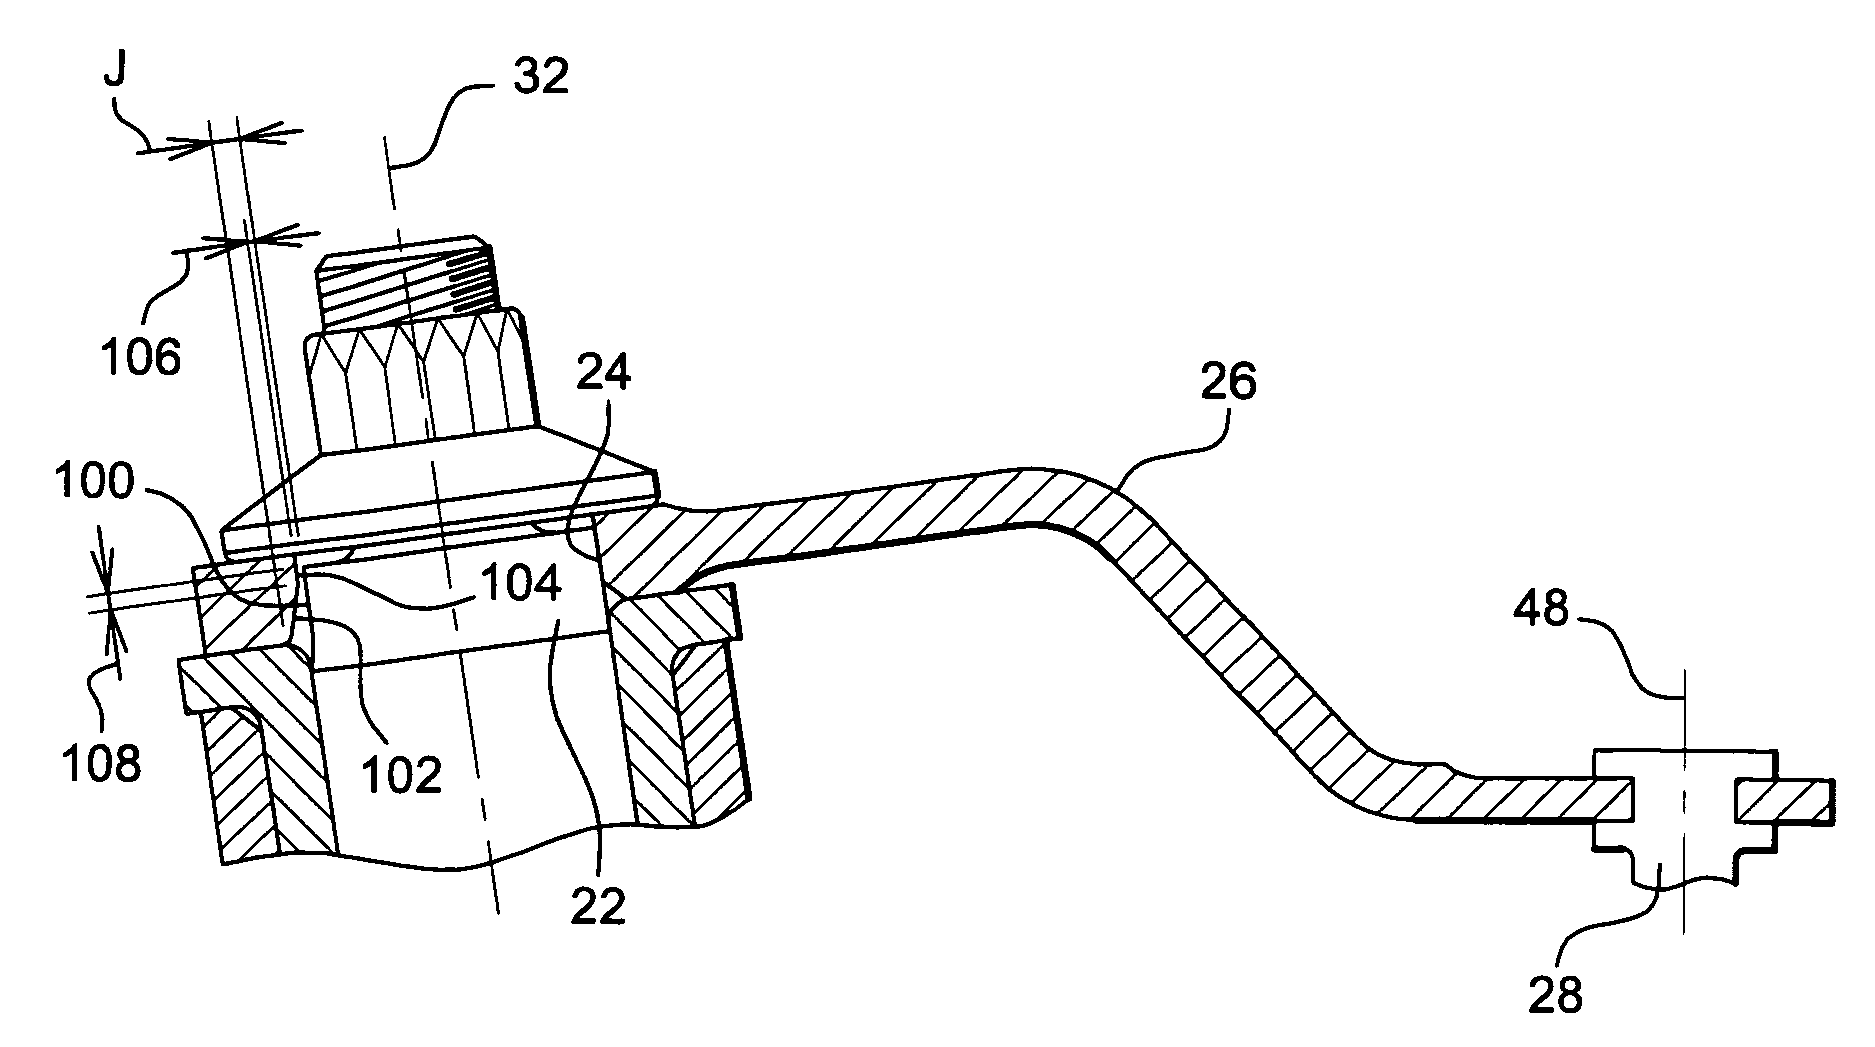 Device for controlling variable-pitch vanes in a turbomachine